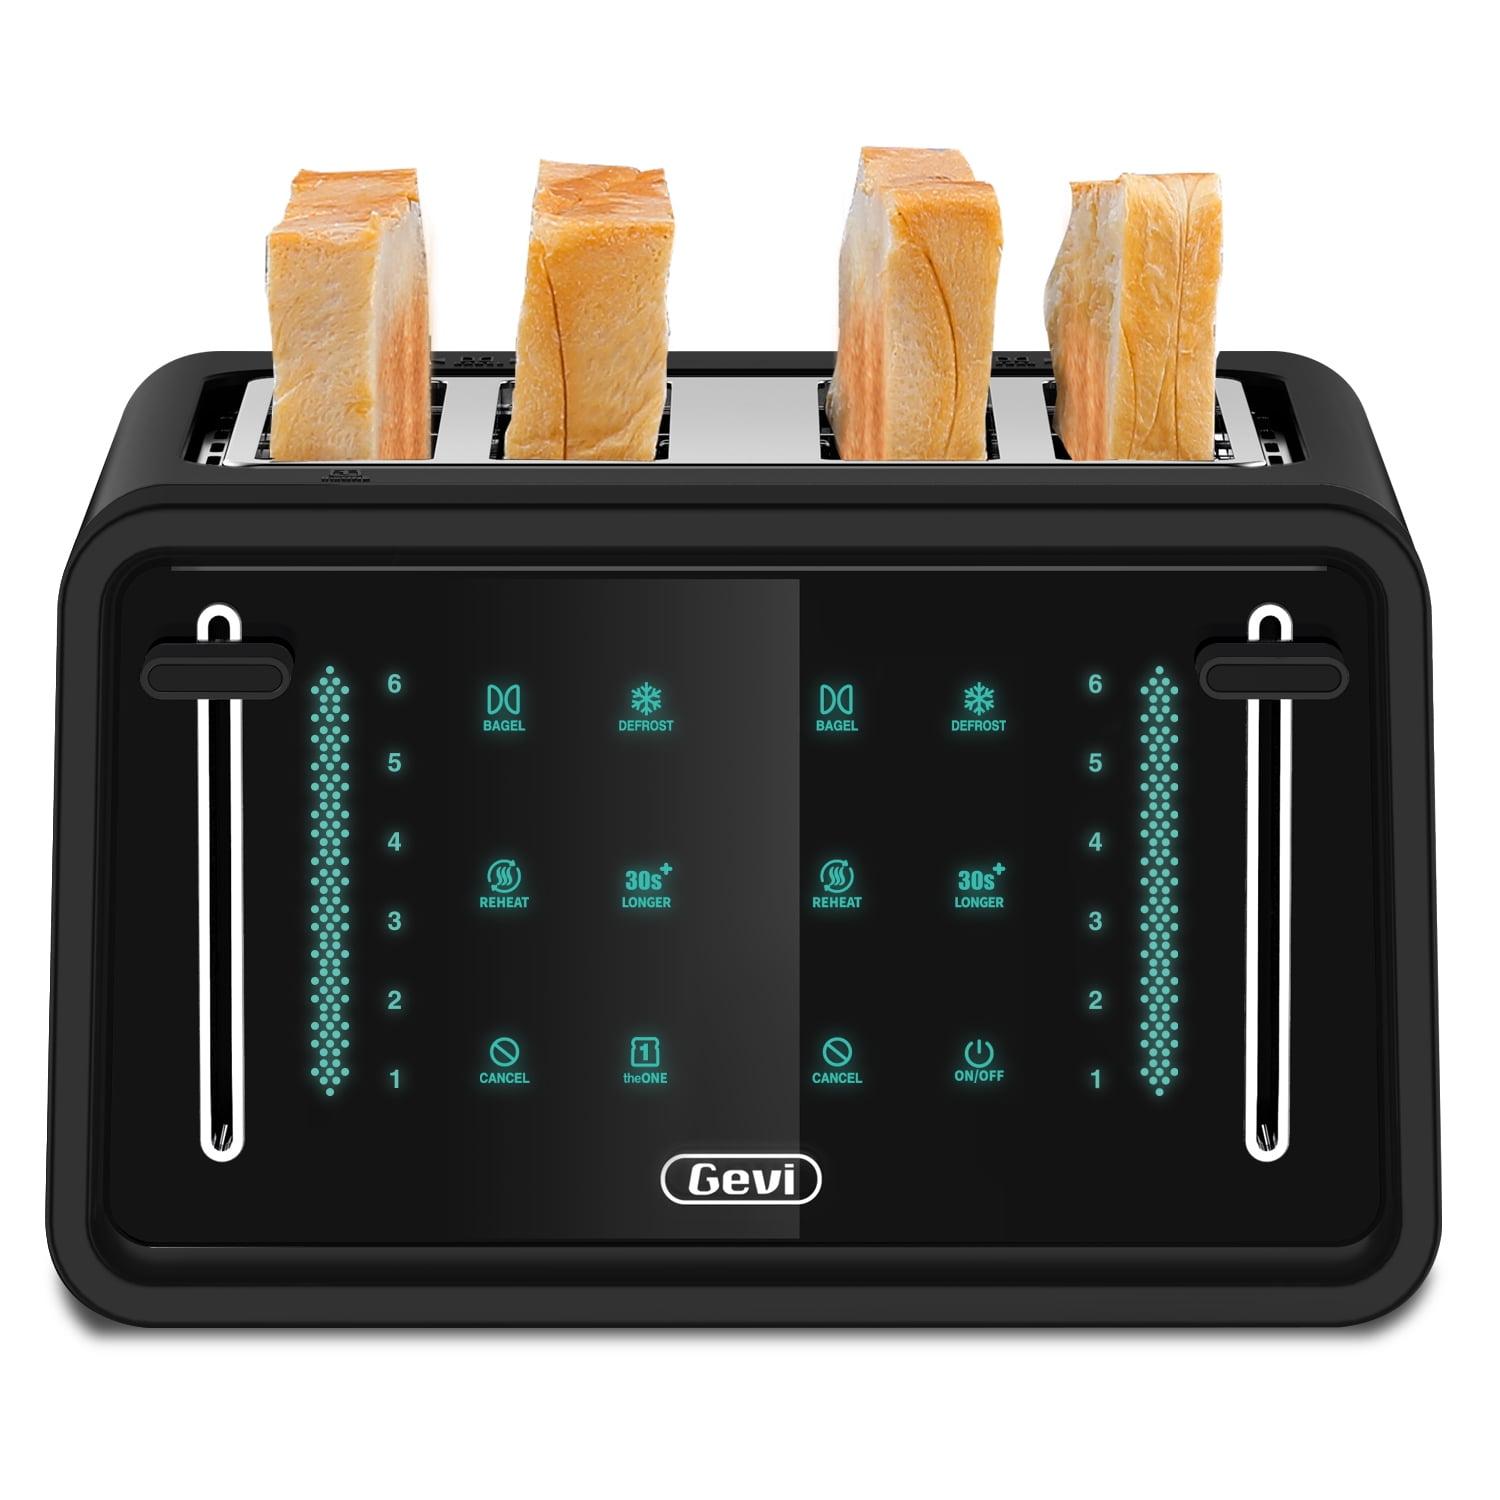 WHALL Long Slot Toaster 4 Slice Brushed Stainless Steel Toaster, 7 Toast  Settings with for $160 - T31269